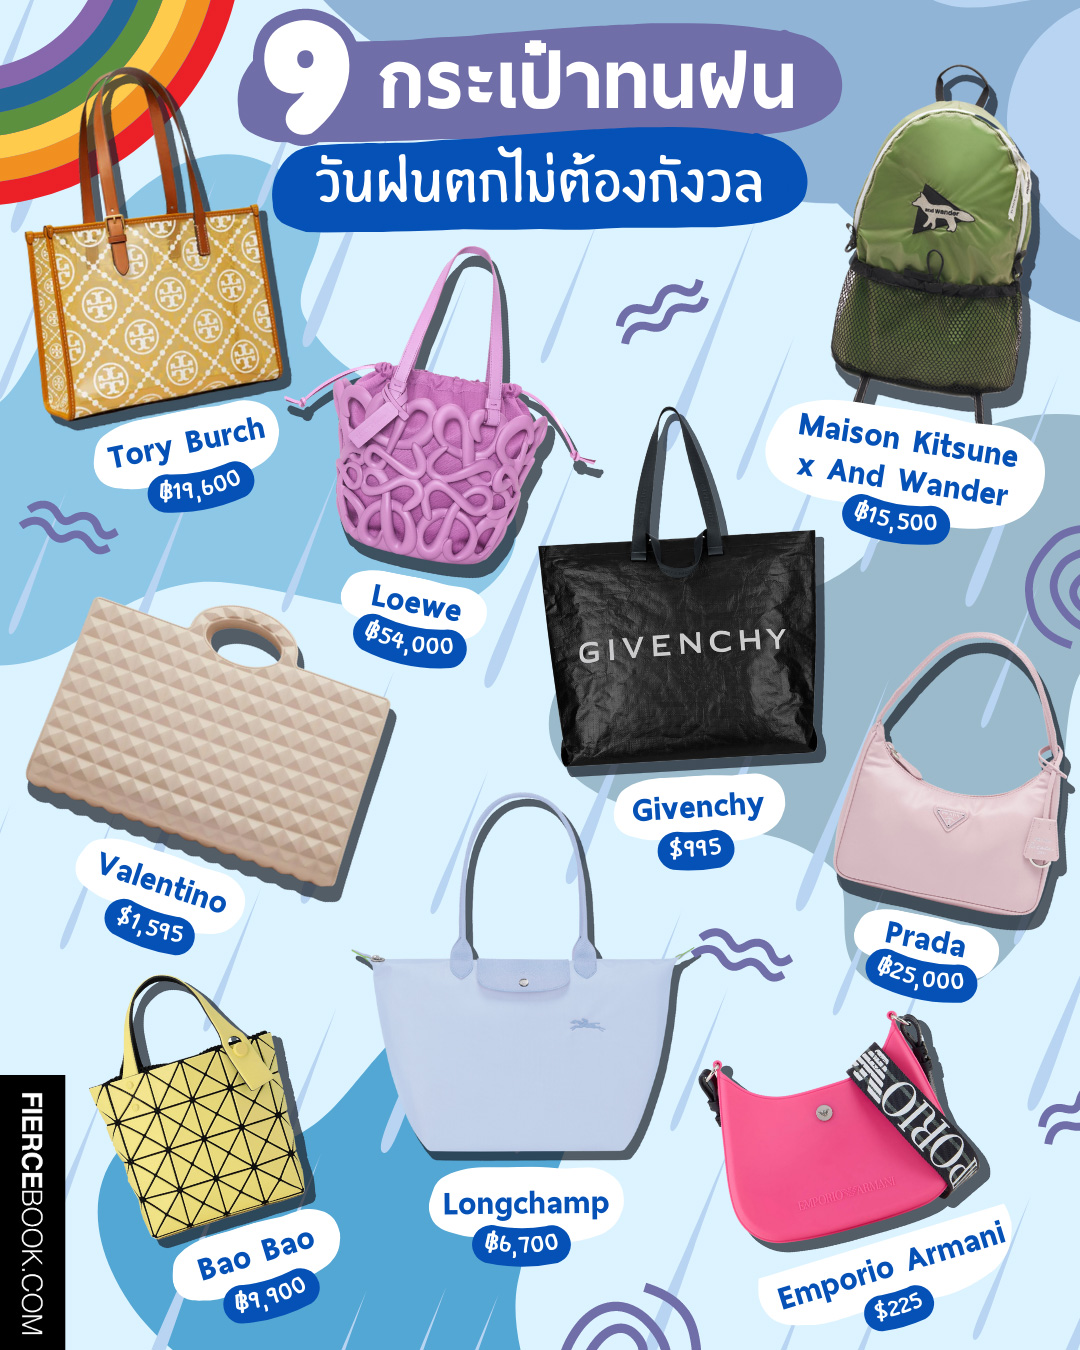 Fashion, กระเป๋า, หน้าฝน, กระเป๋ายาง, กระเป๋า PVC, กระเป๋าทนฝน, โดนละอองน้ำได้, แบรนด์เนม, ไม่หนัง, Tory Burch T Monogram TPU Small Tote, Bao Bao Issey Miyake Lucent Boxy, Valentino Le Troisième Rubber Shopping Bag, Emporio Armani Recycled PVC Gummy Bag, Loewe Anagram inflated basket in light foam rubber, Givenchy G-shopper bag in technical fibre, Longchamp Le Pliage Green Shoulder Bag, Prada Re-Nylon Prada Re-Edition 2000 mini-bag, Maison Kitsune x And Wander Backpack